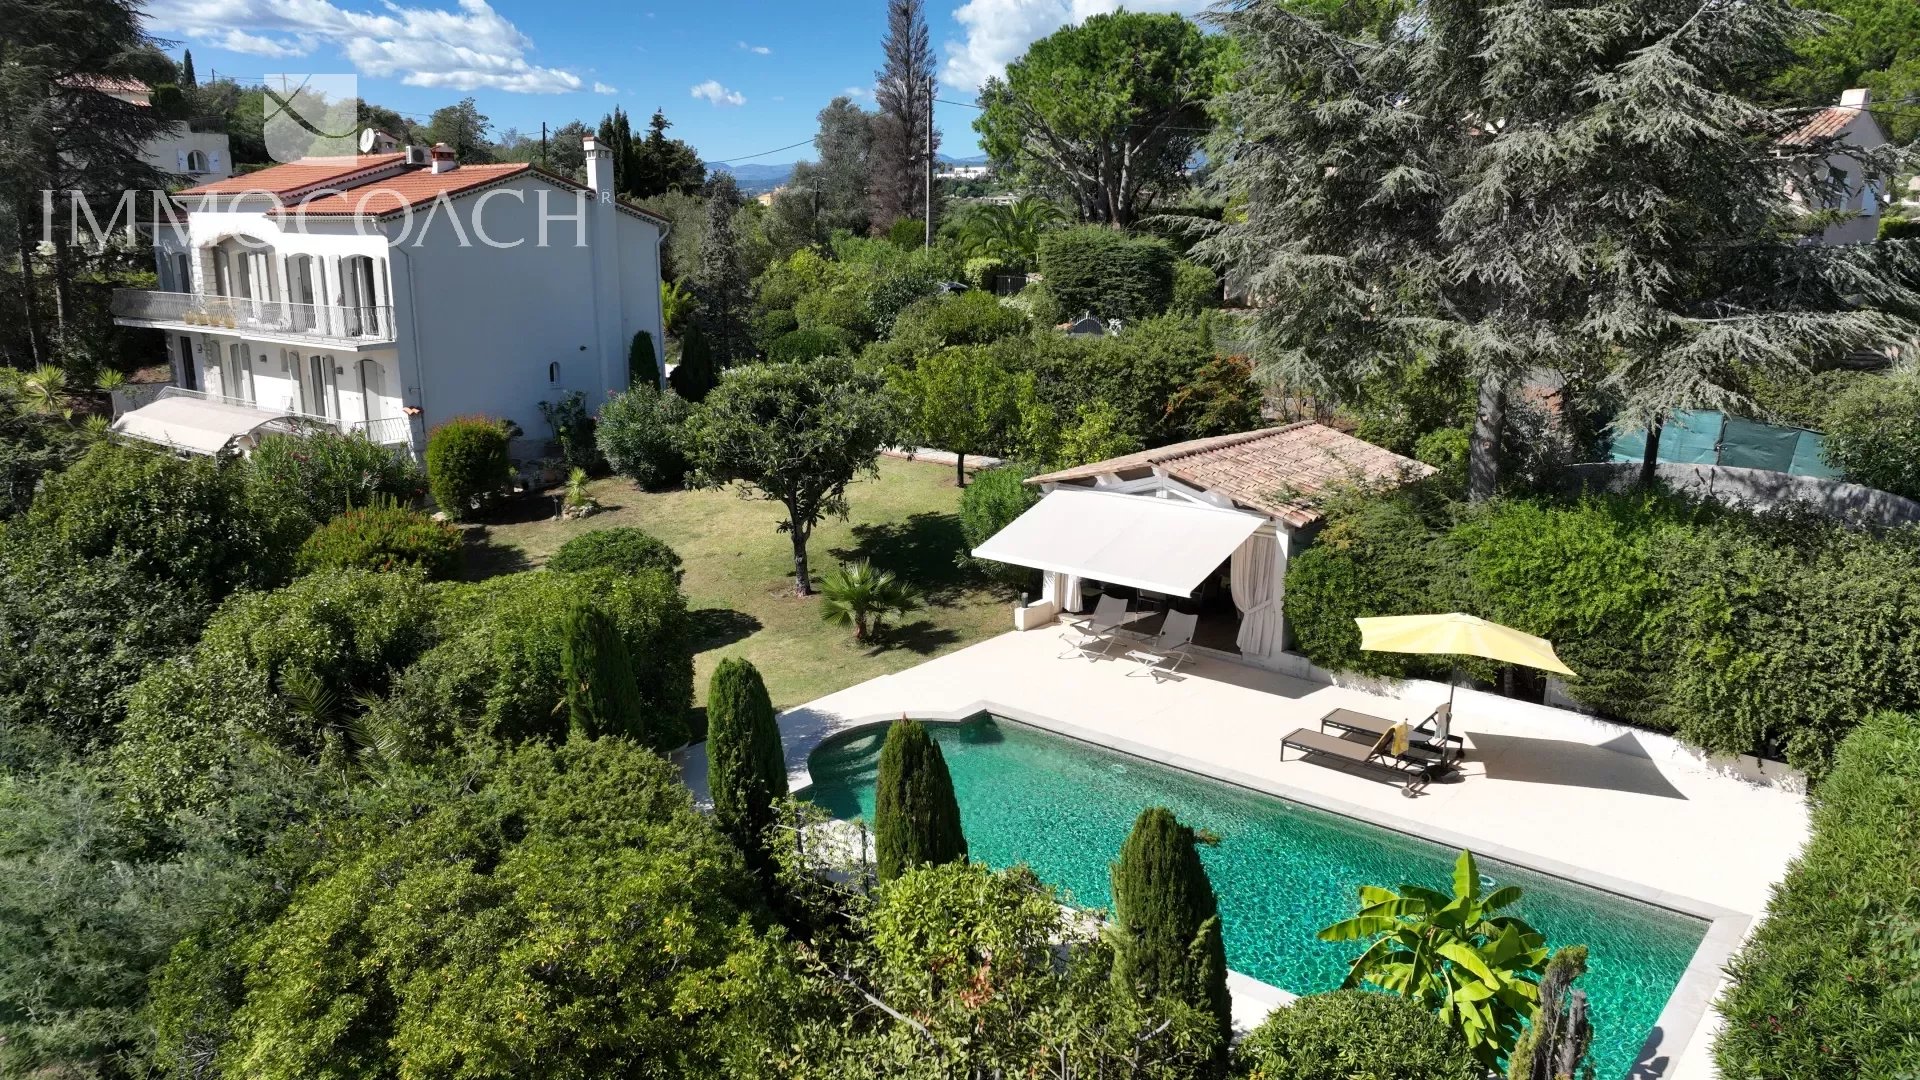 Near CANNES and MOUGINS, Beautiful 300 sqm Property with Sea View on a 2500 sqm Plot